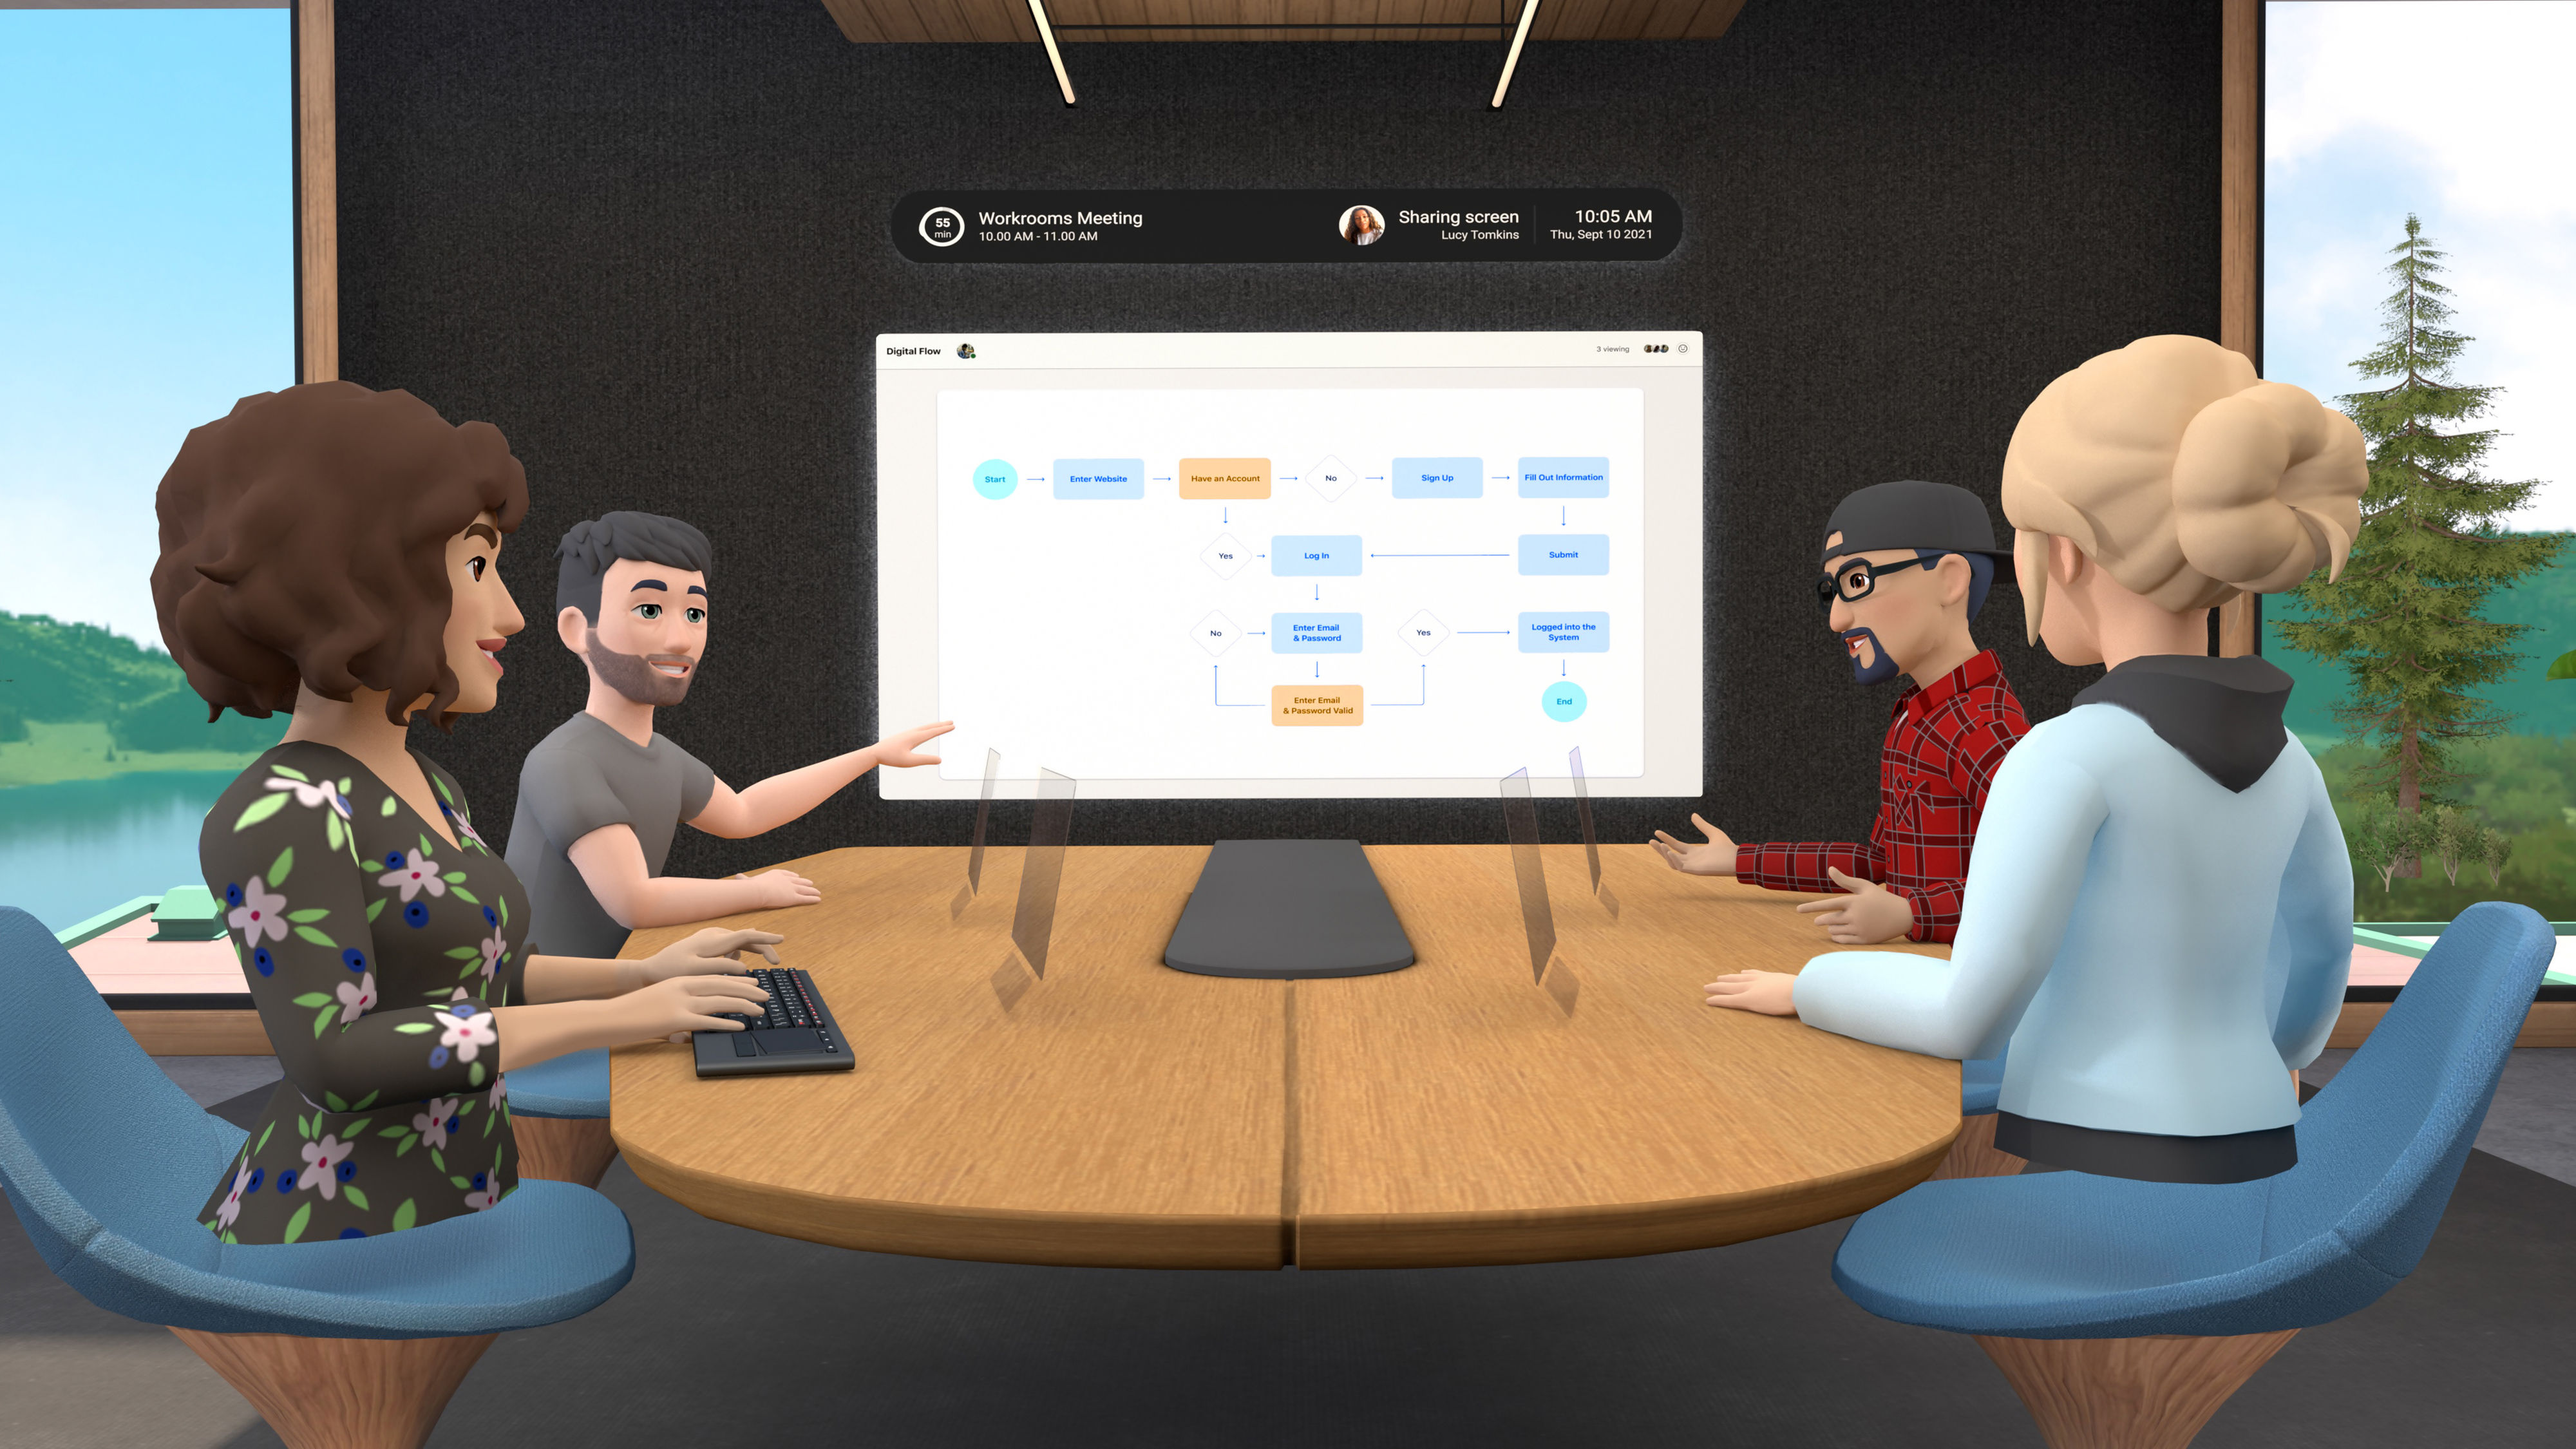 An image of the Meta application, Facebook Horizon Workrooms. It shows four virtual characters having a meeting. They're seated around a desk and referring to a screen. 